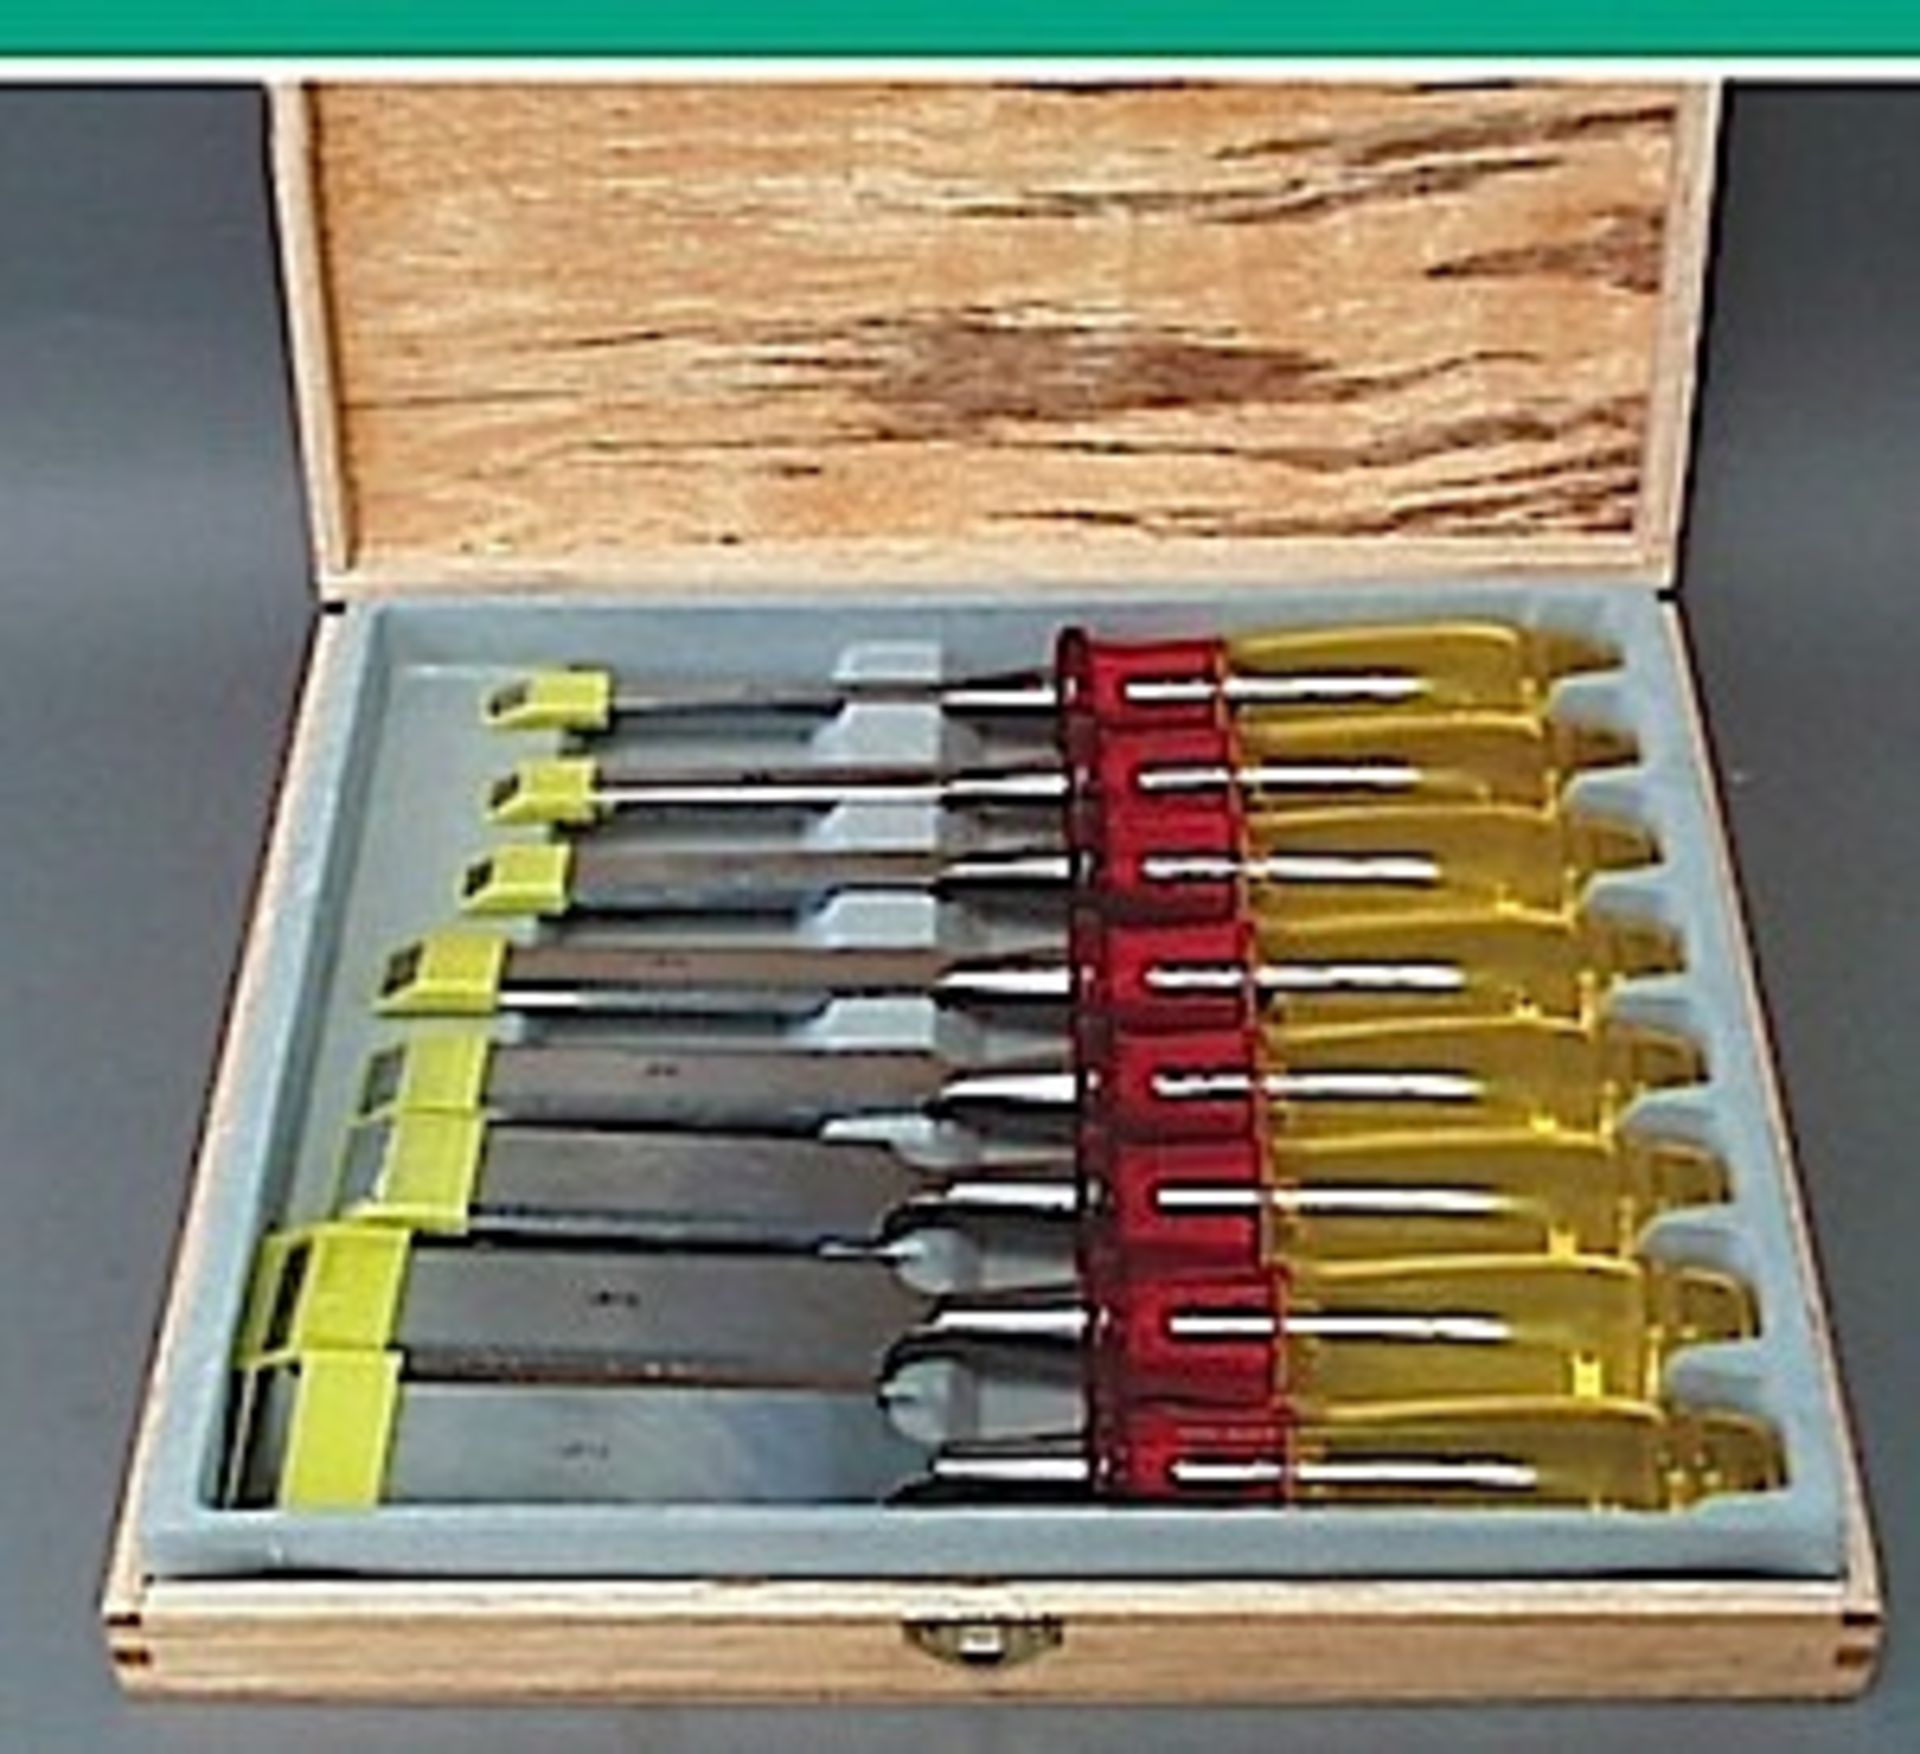 V 8 Piece Professional Chisel Set with wooden storage case - Image 2 of 2